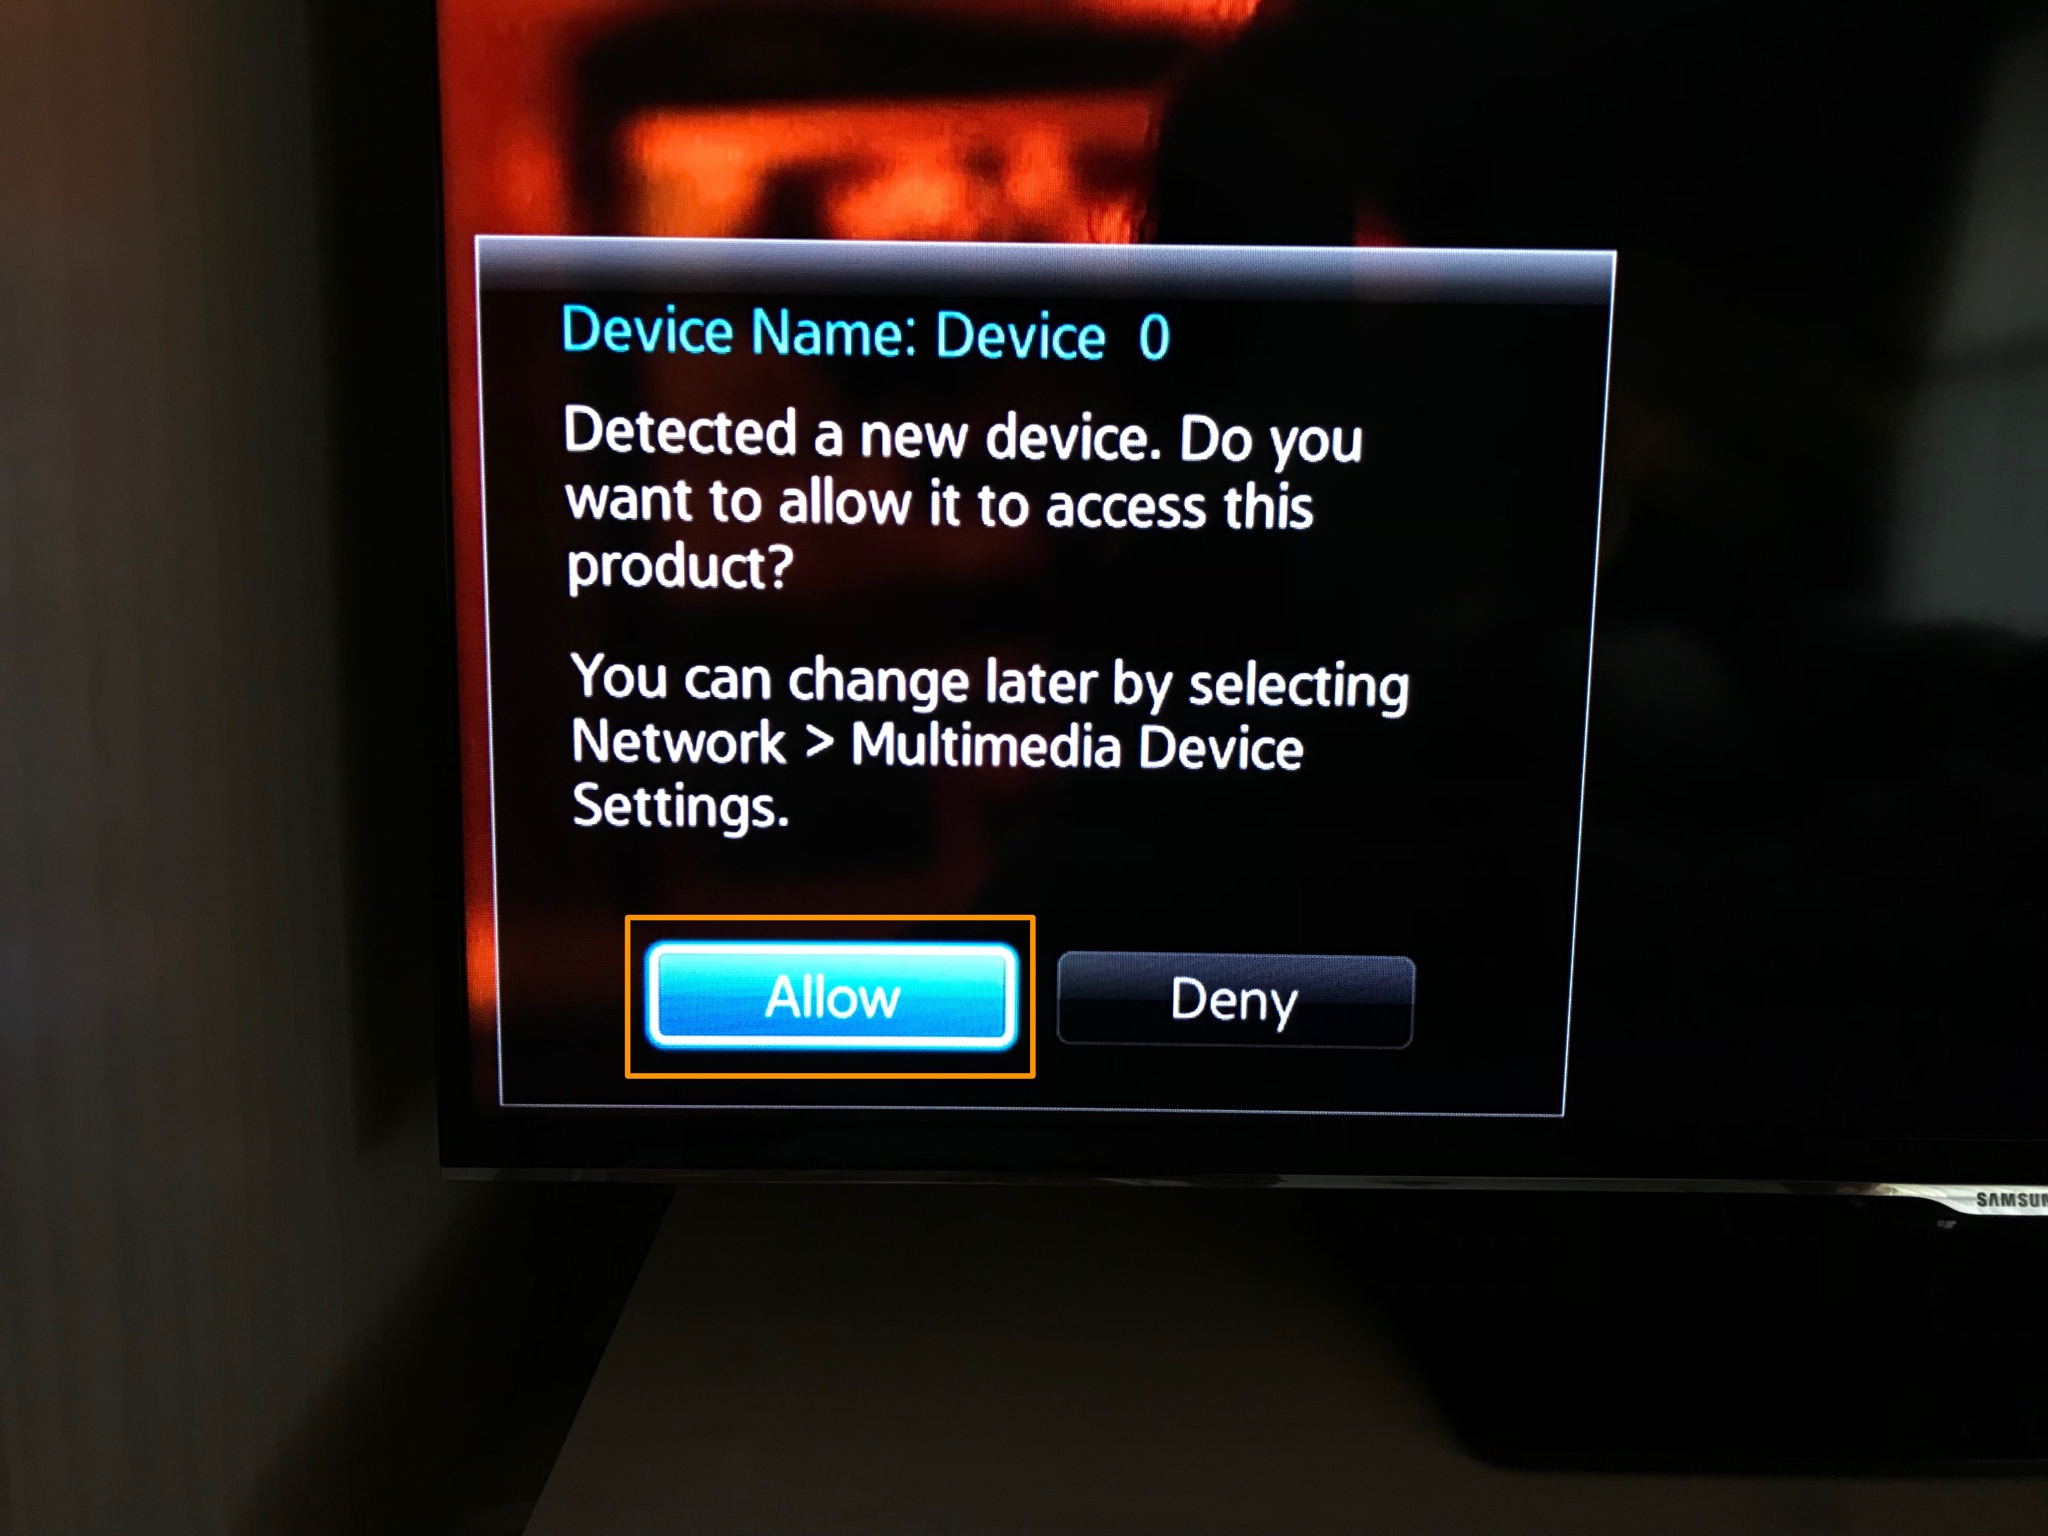 Mirror Your Iphone Or Ipad On A Smart Tv, Can I Mirror From Ipad To Lg Tv